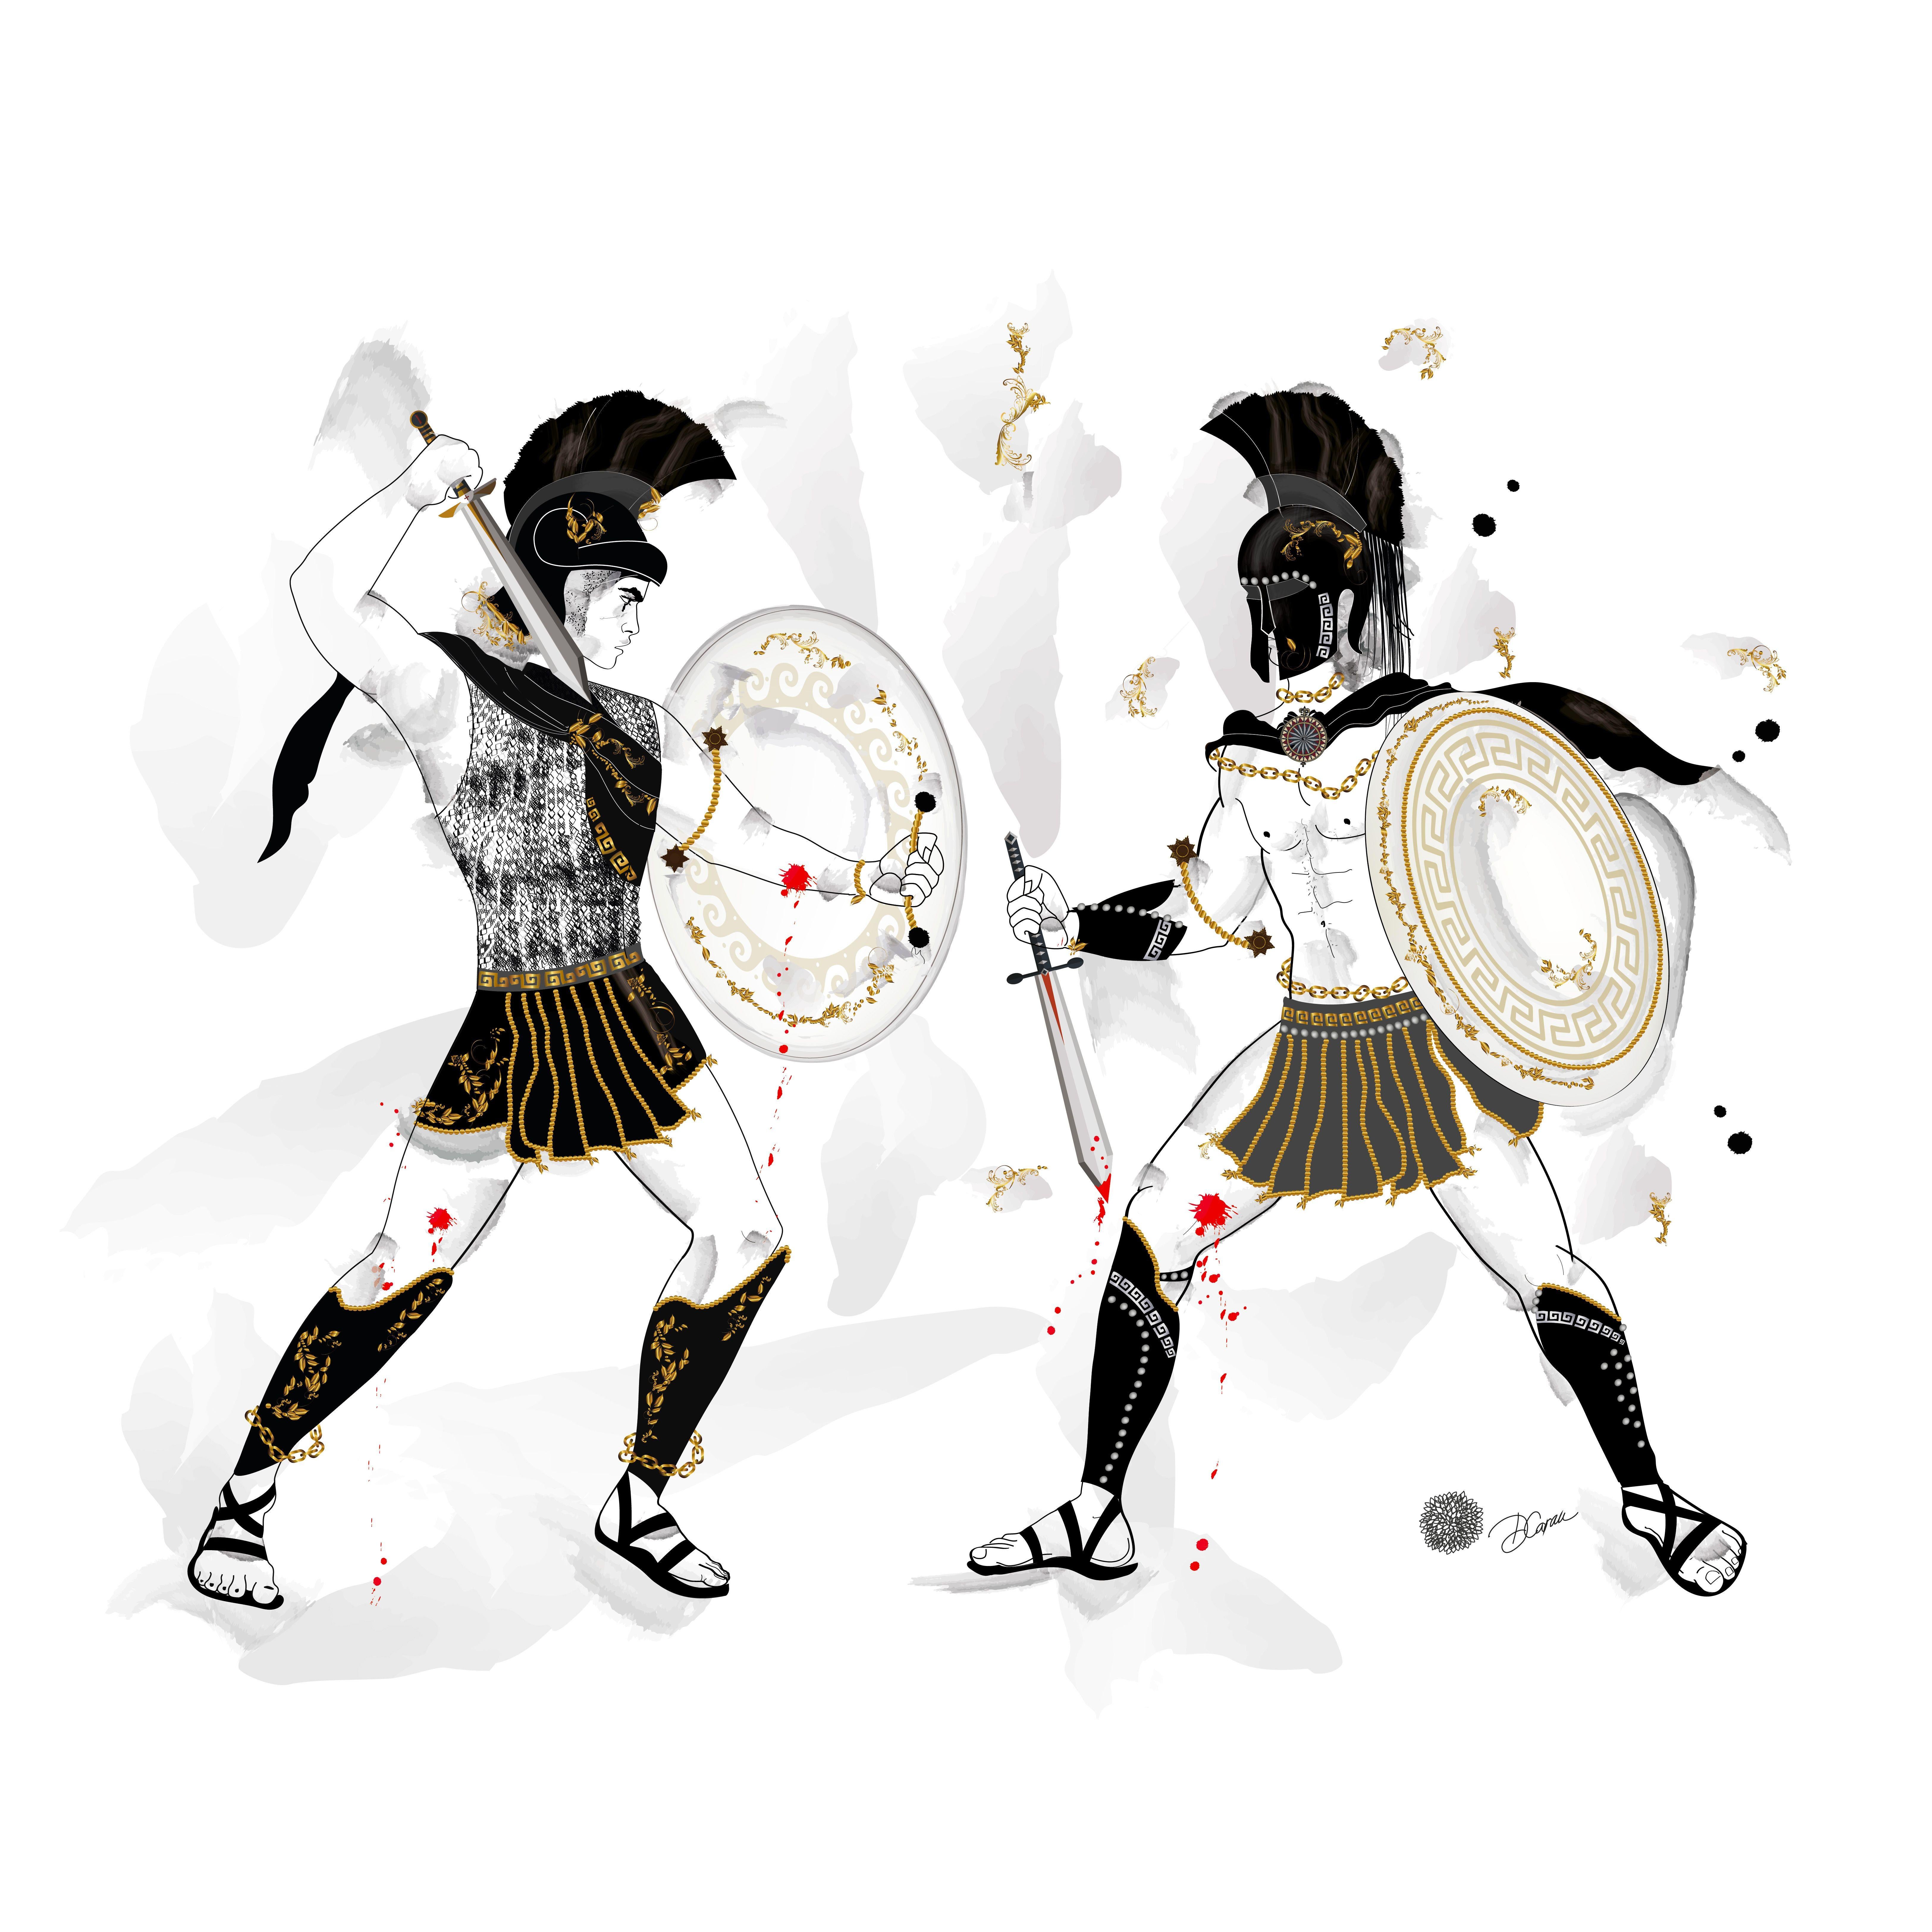 Achilles assailed Hector - Troy - Epic - Mytology, Drawing, Pen & Ink on Paper - Art by Artemisia Fine Art